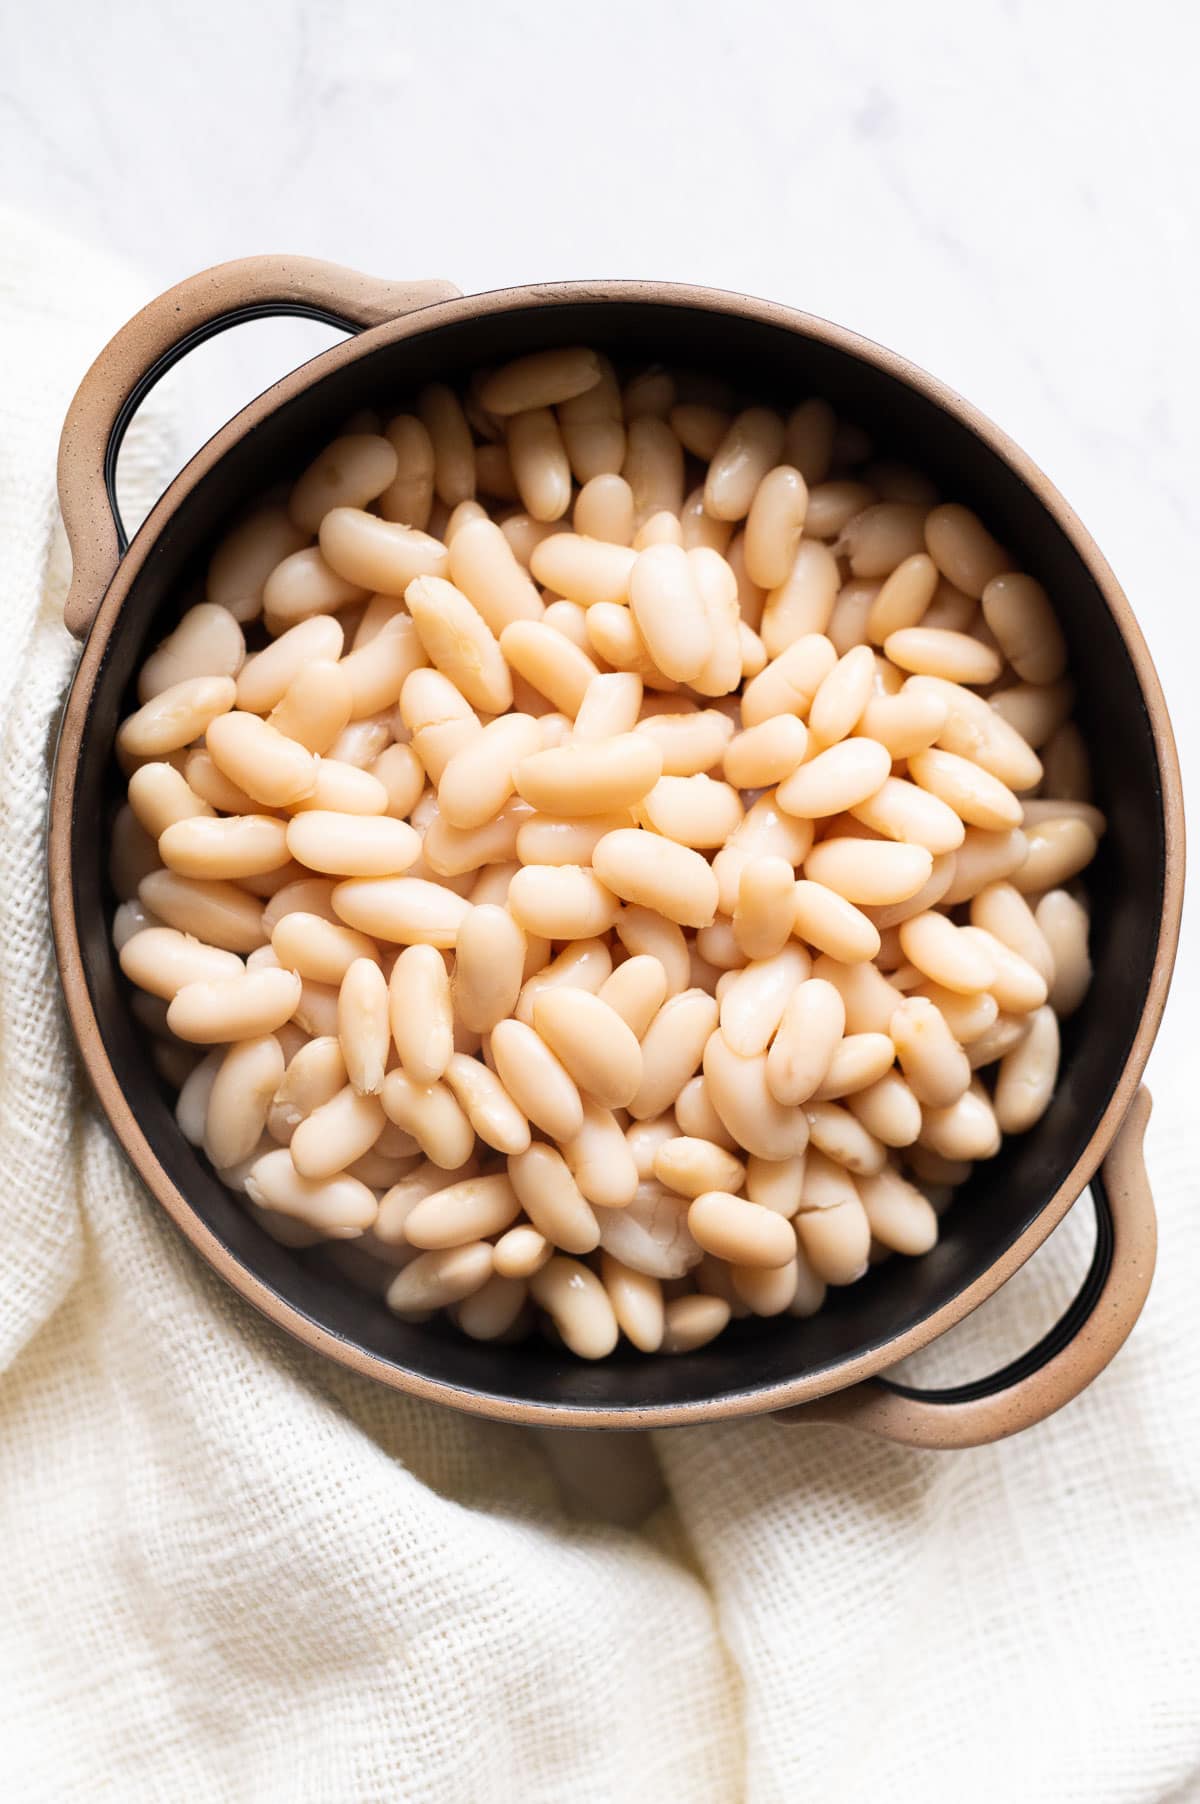 Cooked cannellini beans in a black bowl. Linen towel around it.